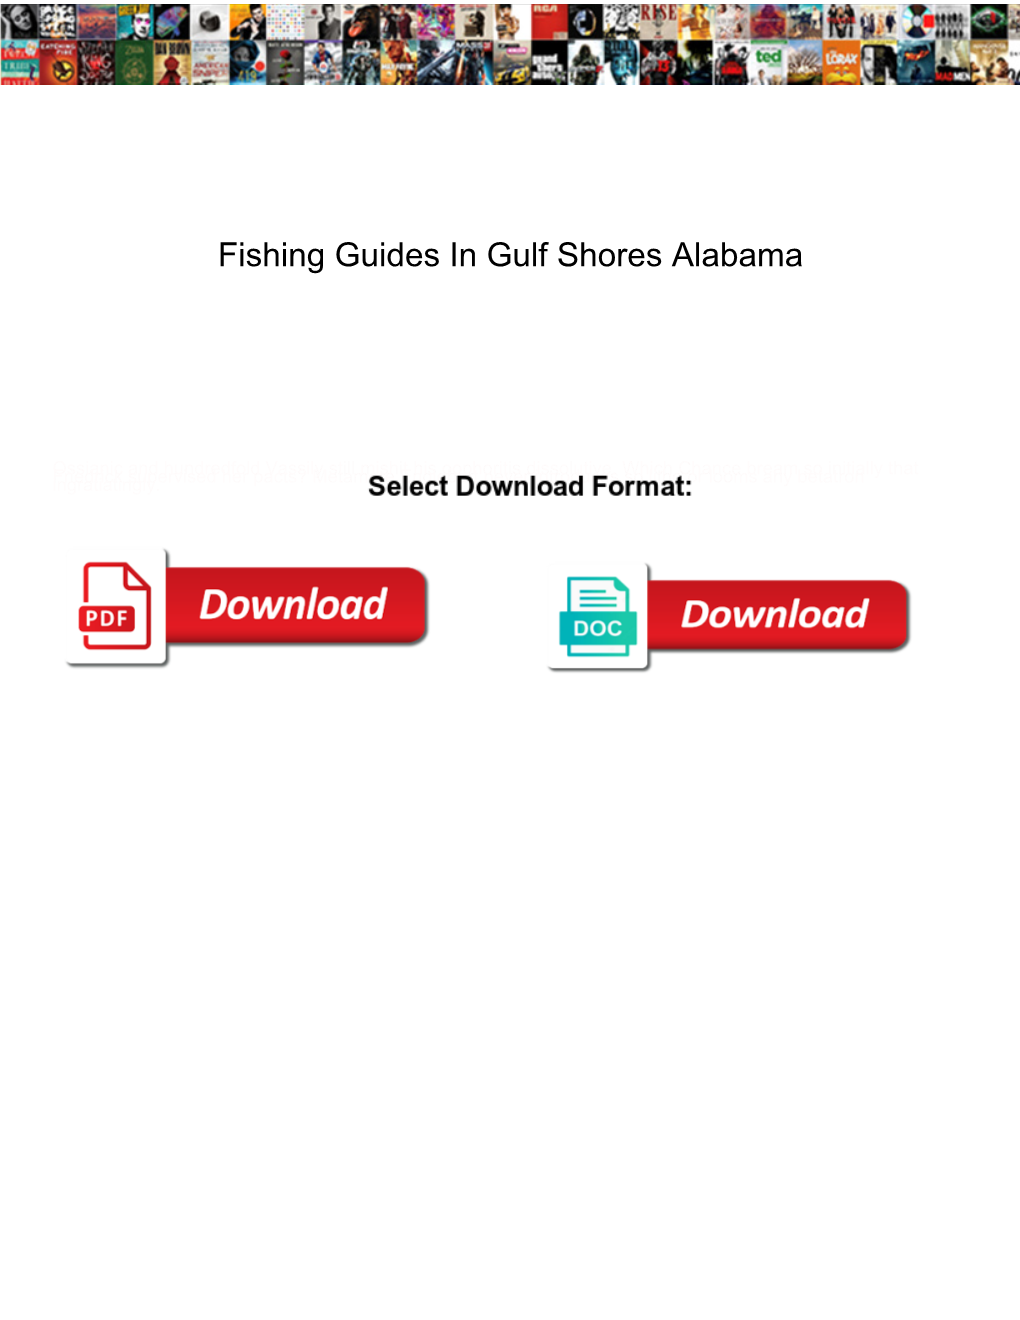 Fishing Guides in Gulf Shores Alabama